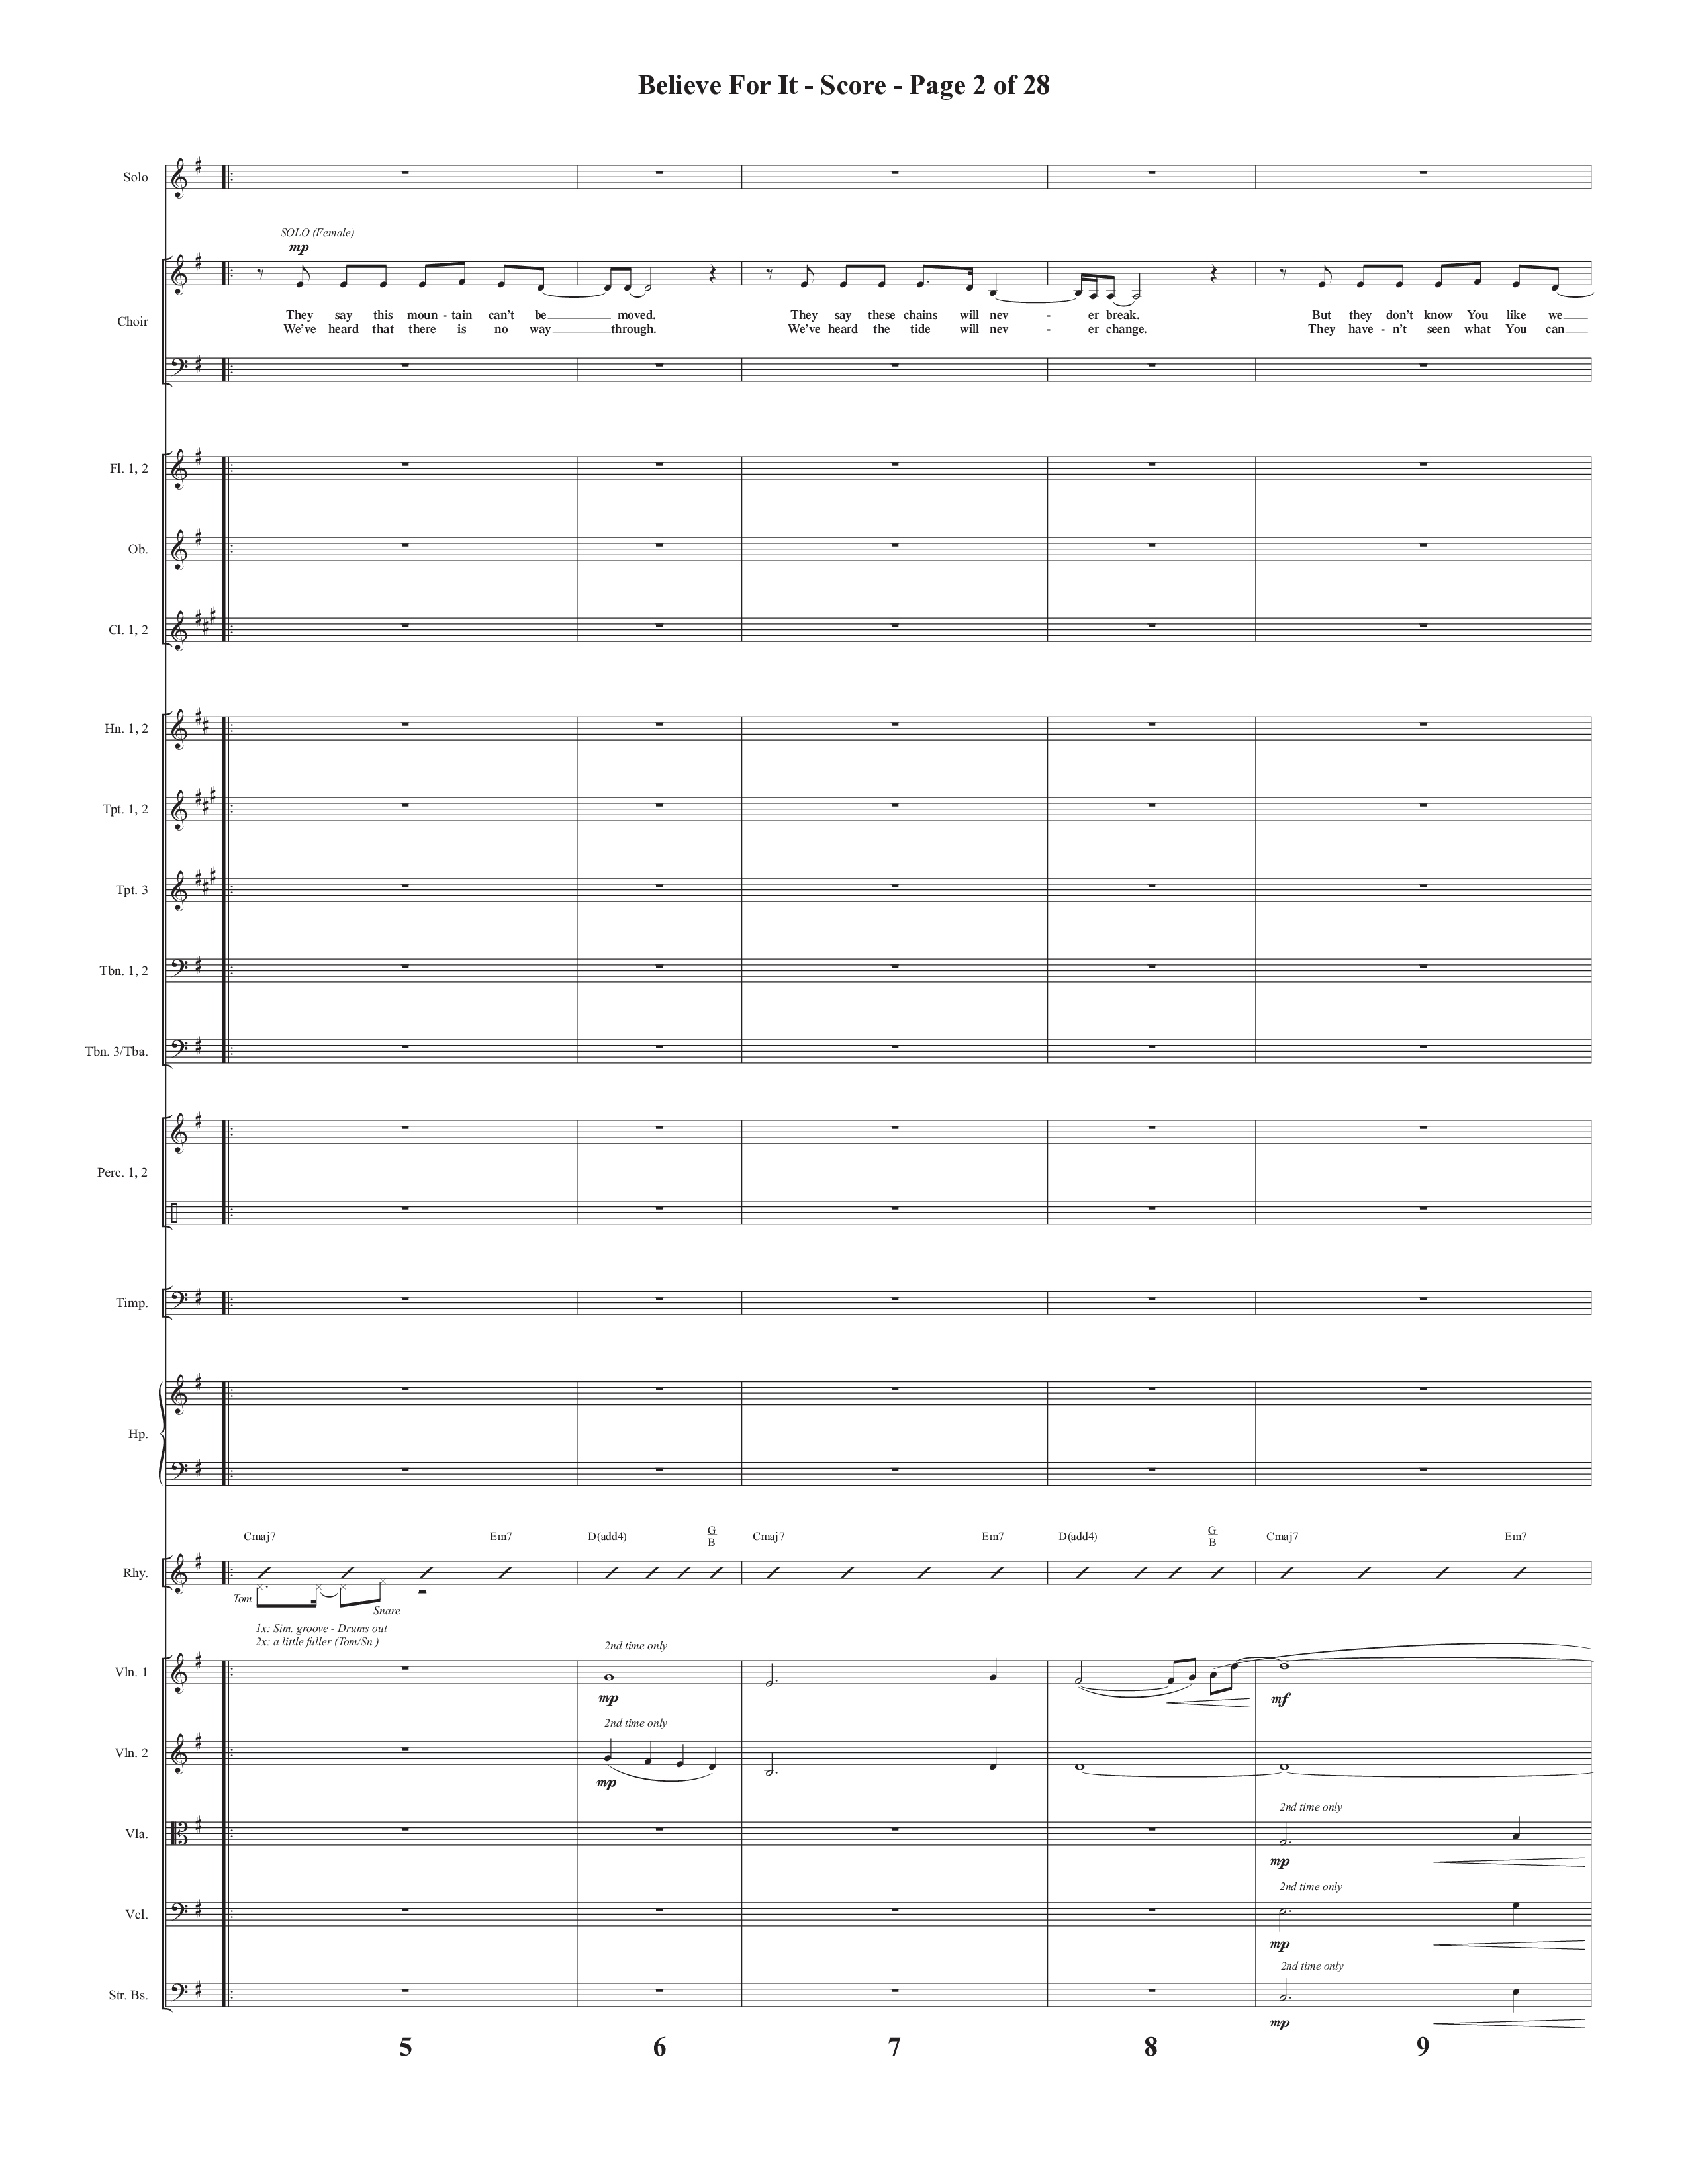 Believe For It (Choral Anthem SATB) Conductor's Score (Semsen Music / Arr. Phil Nitz)